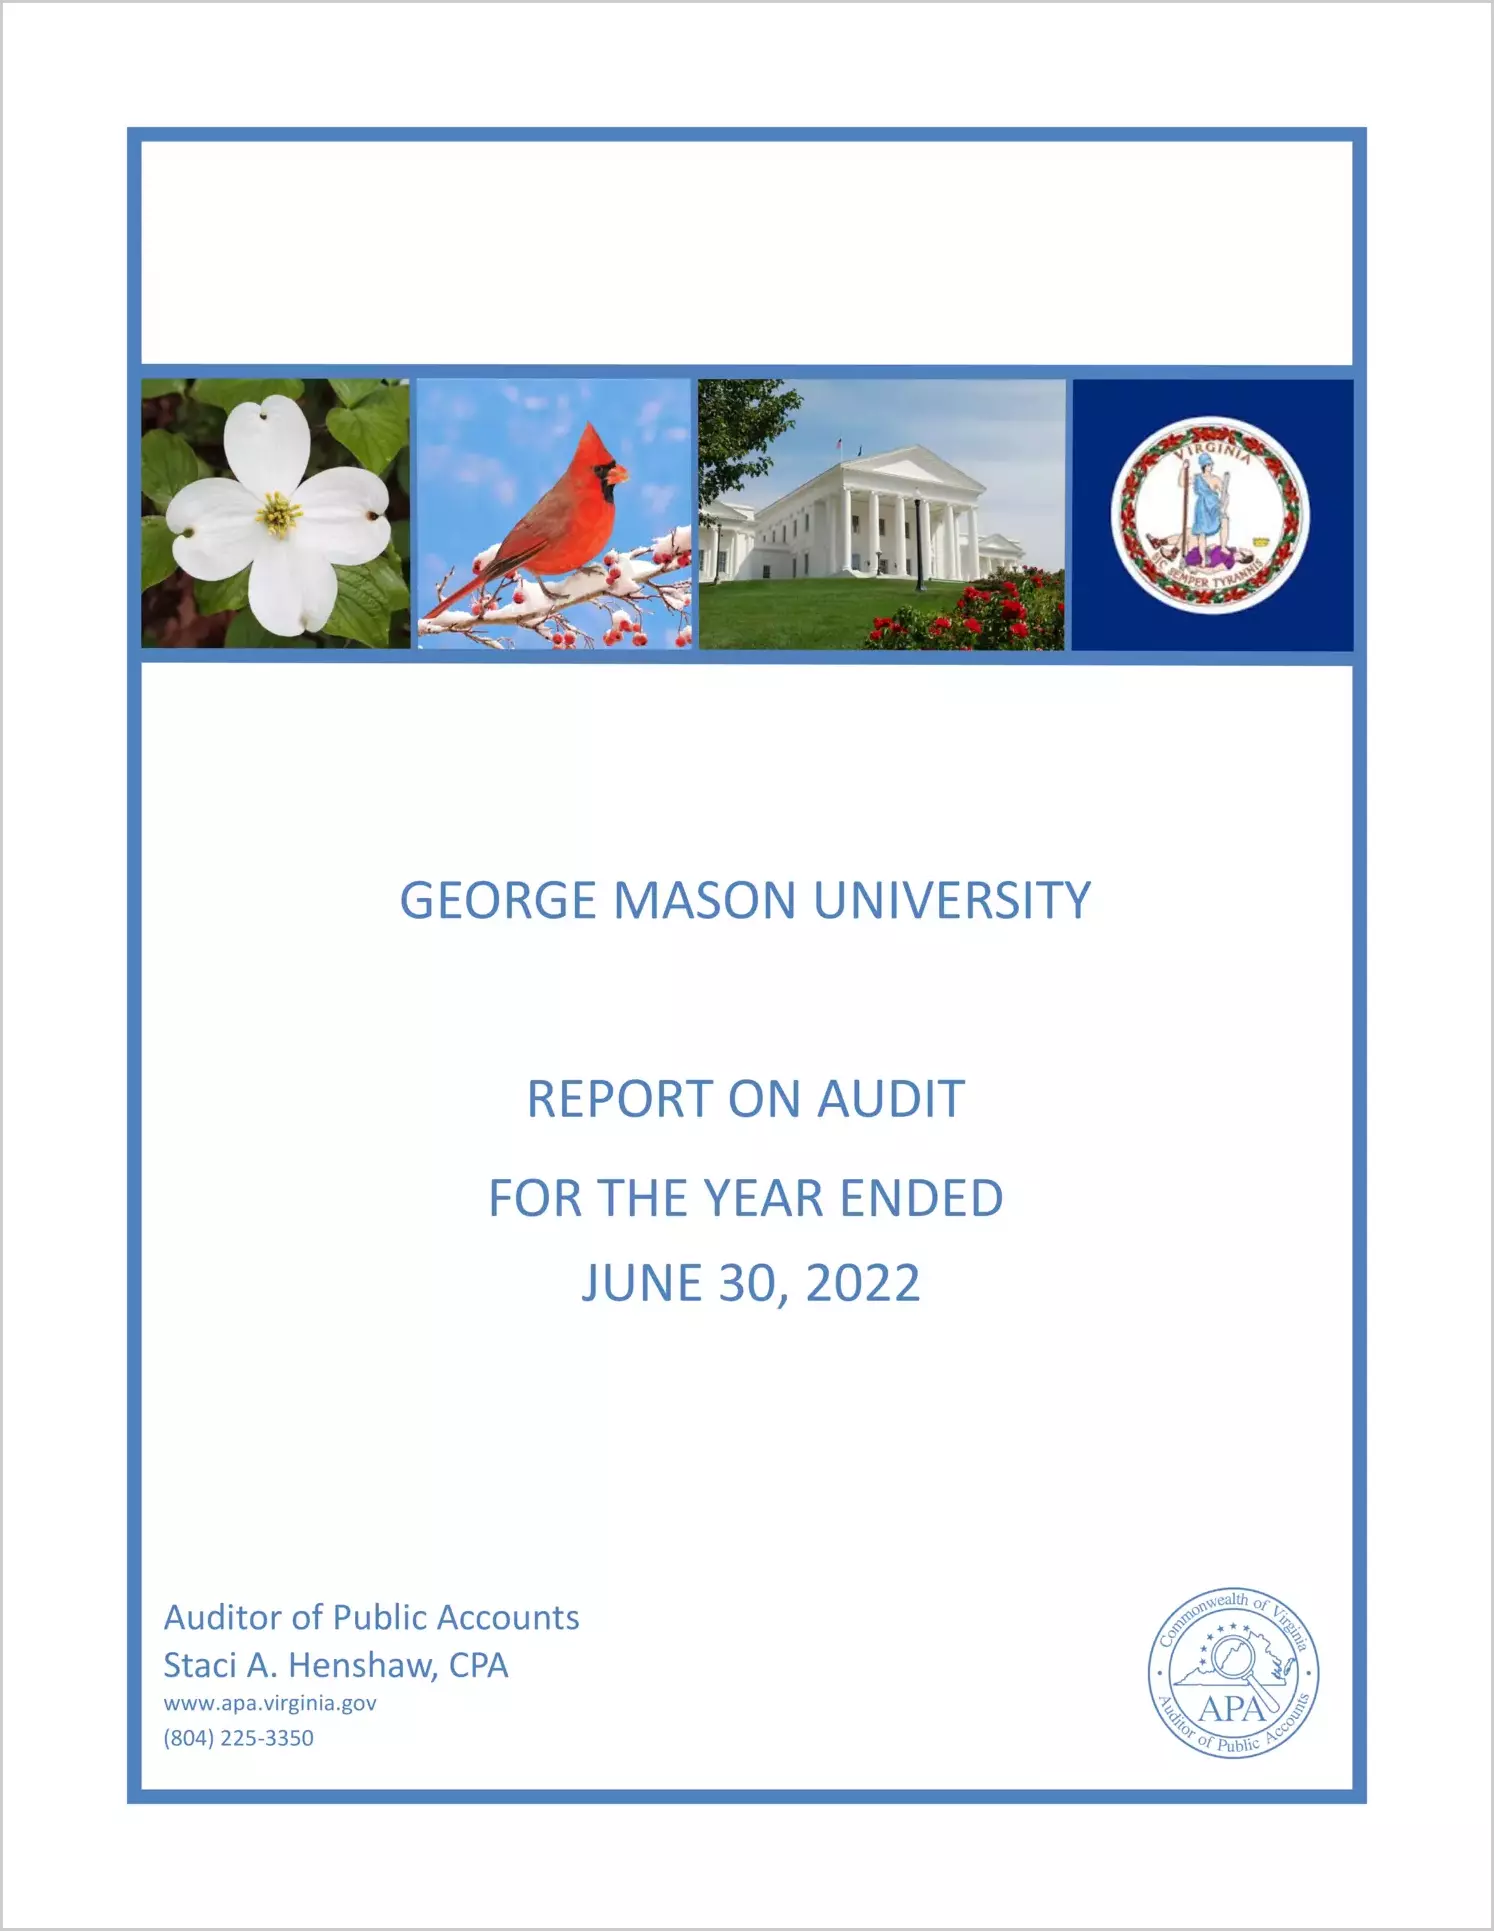 George Mason University for the year ended June 30, 2022